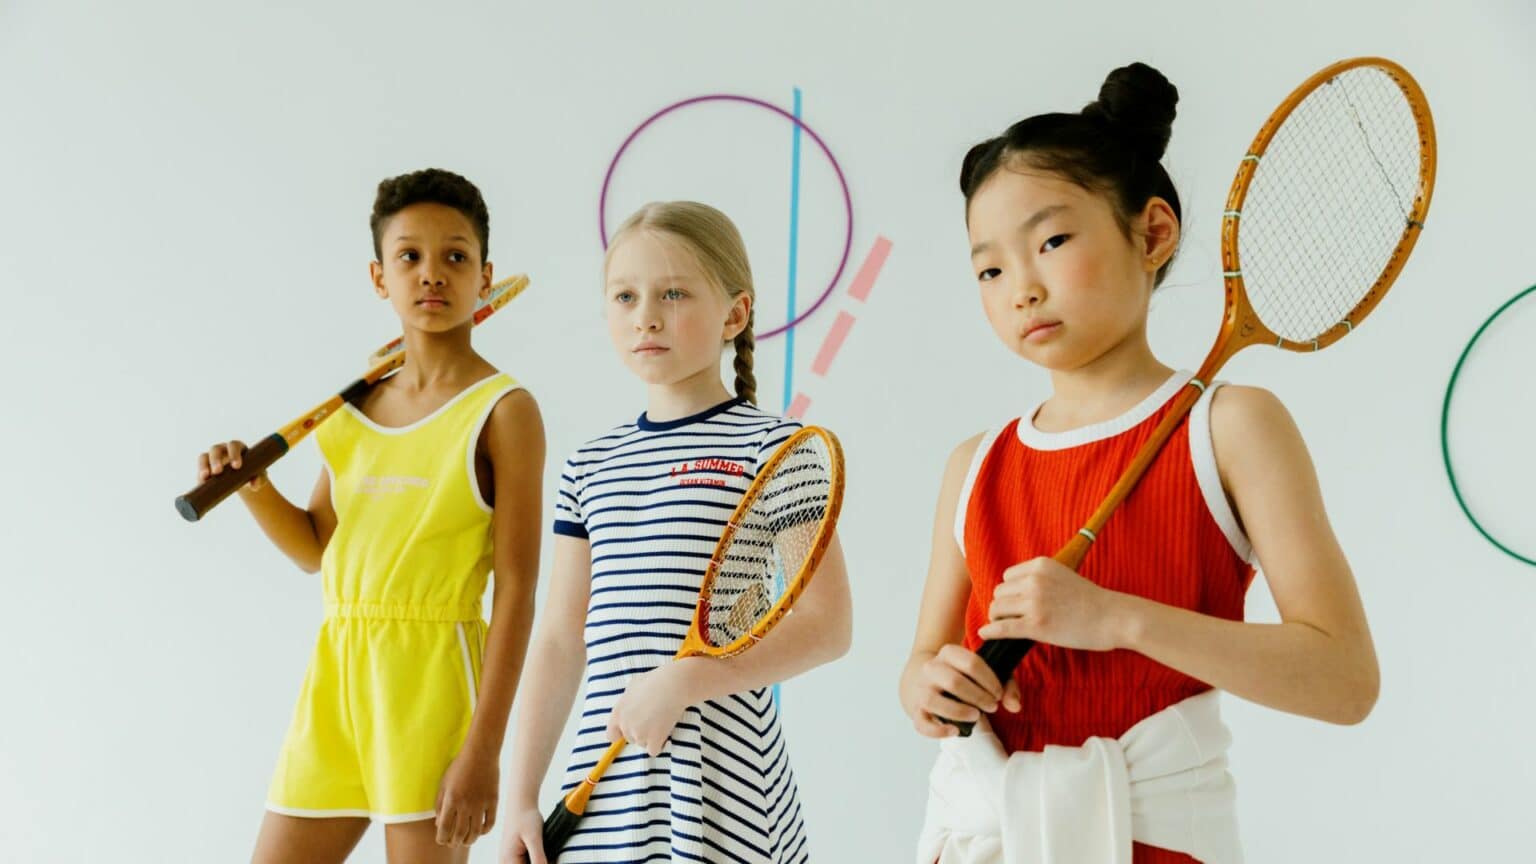 What to Look for When Buying Tennis Rackets for Kids